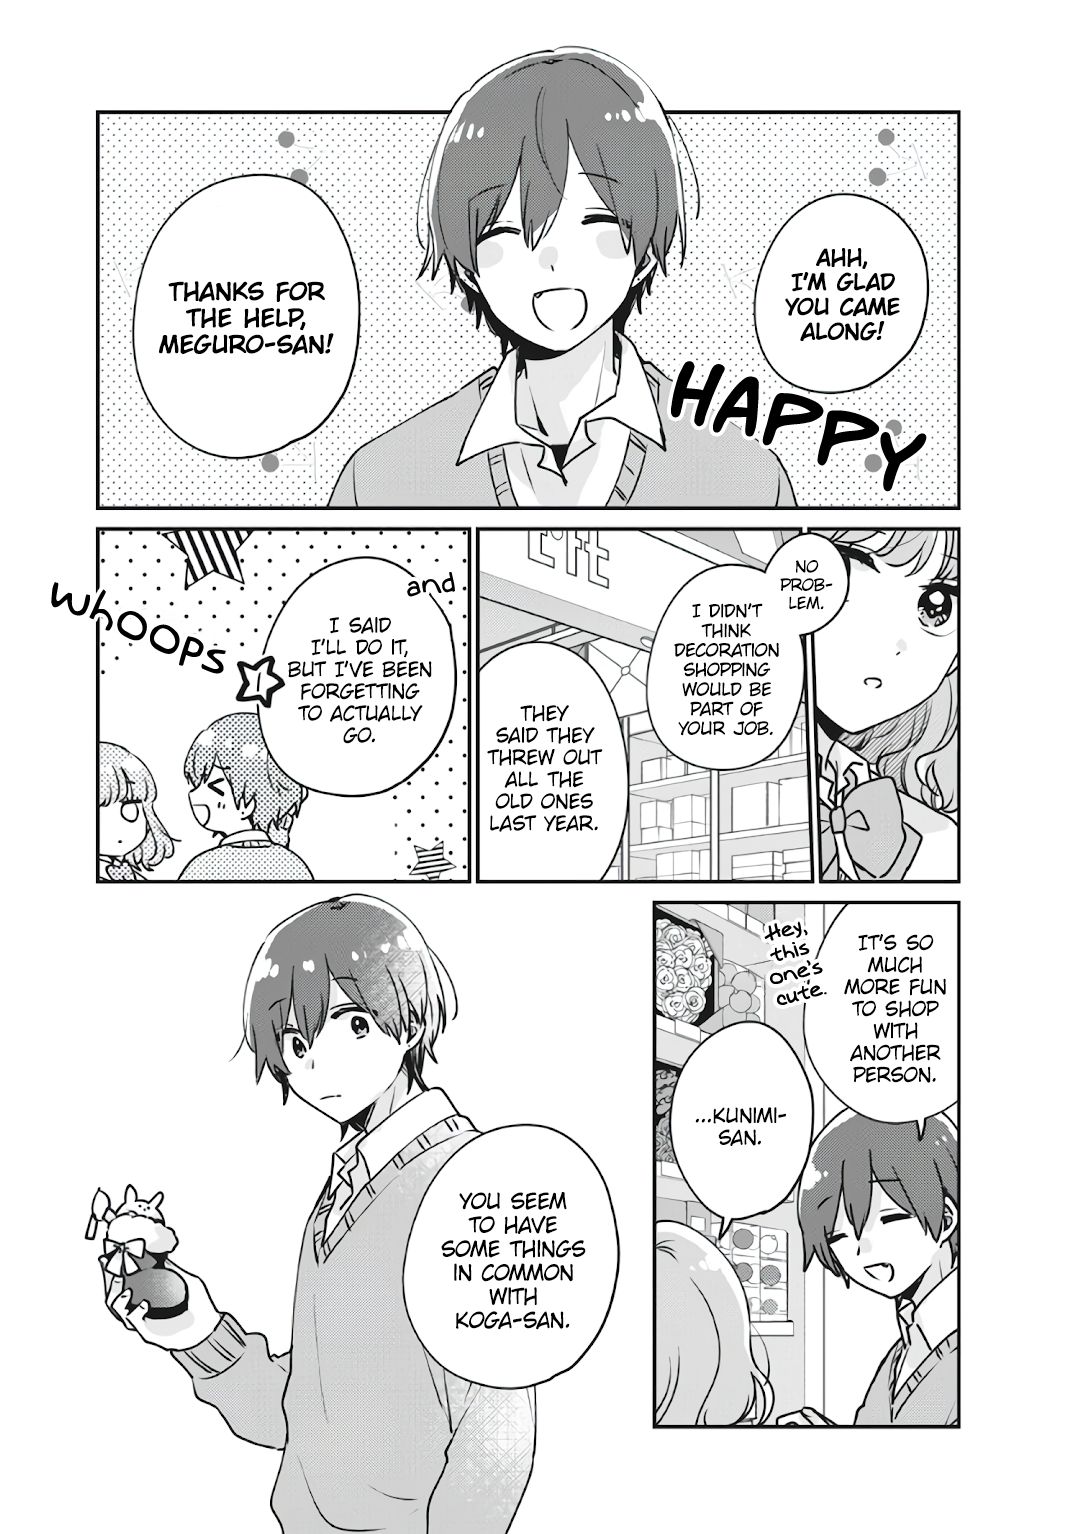 It's Not Meguro-san's First Time chapter 36 page 9